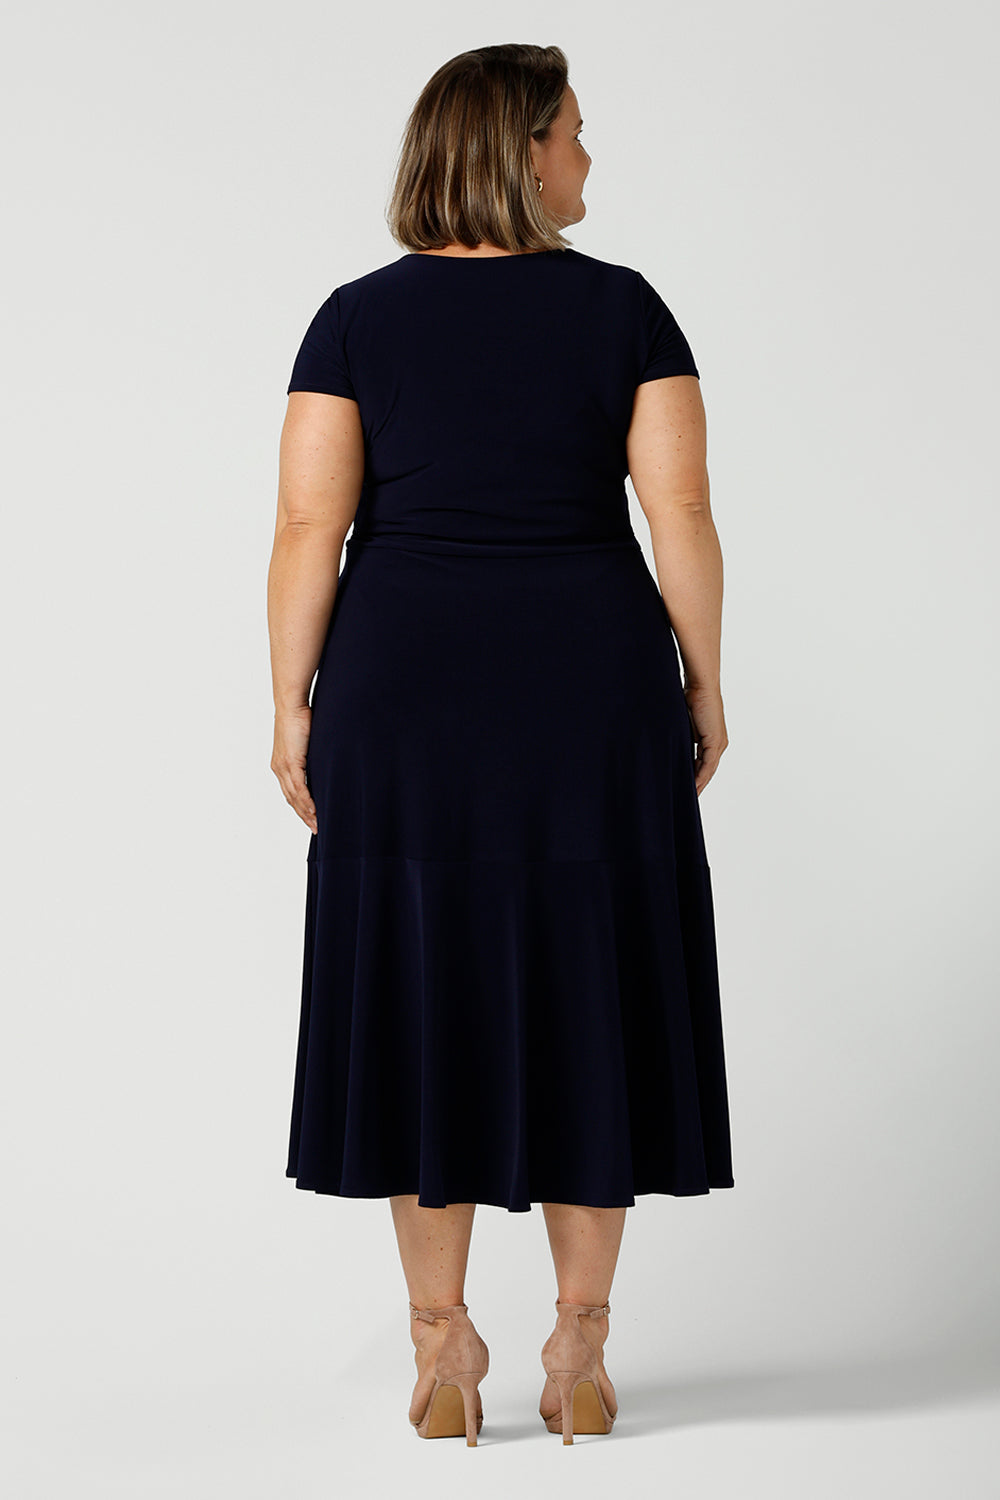 If you're looking for dresses made in Australia, look to this elegant navy dress shown on a curvy, size 18 woman as a plus size dress. Shown from the back, this high neck, short sleeve dress with flared skirt and ruffle hemline is a good workwear dress as well as a classic cocktail dress. With a midi-length skirt, shop this dress in plus sizes as well as petite thanks to made-in-Australia, ethical  ladies clothing brand, Leina & Fleur